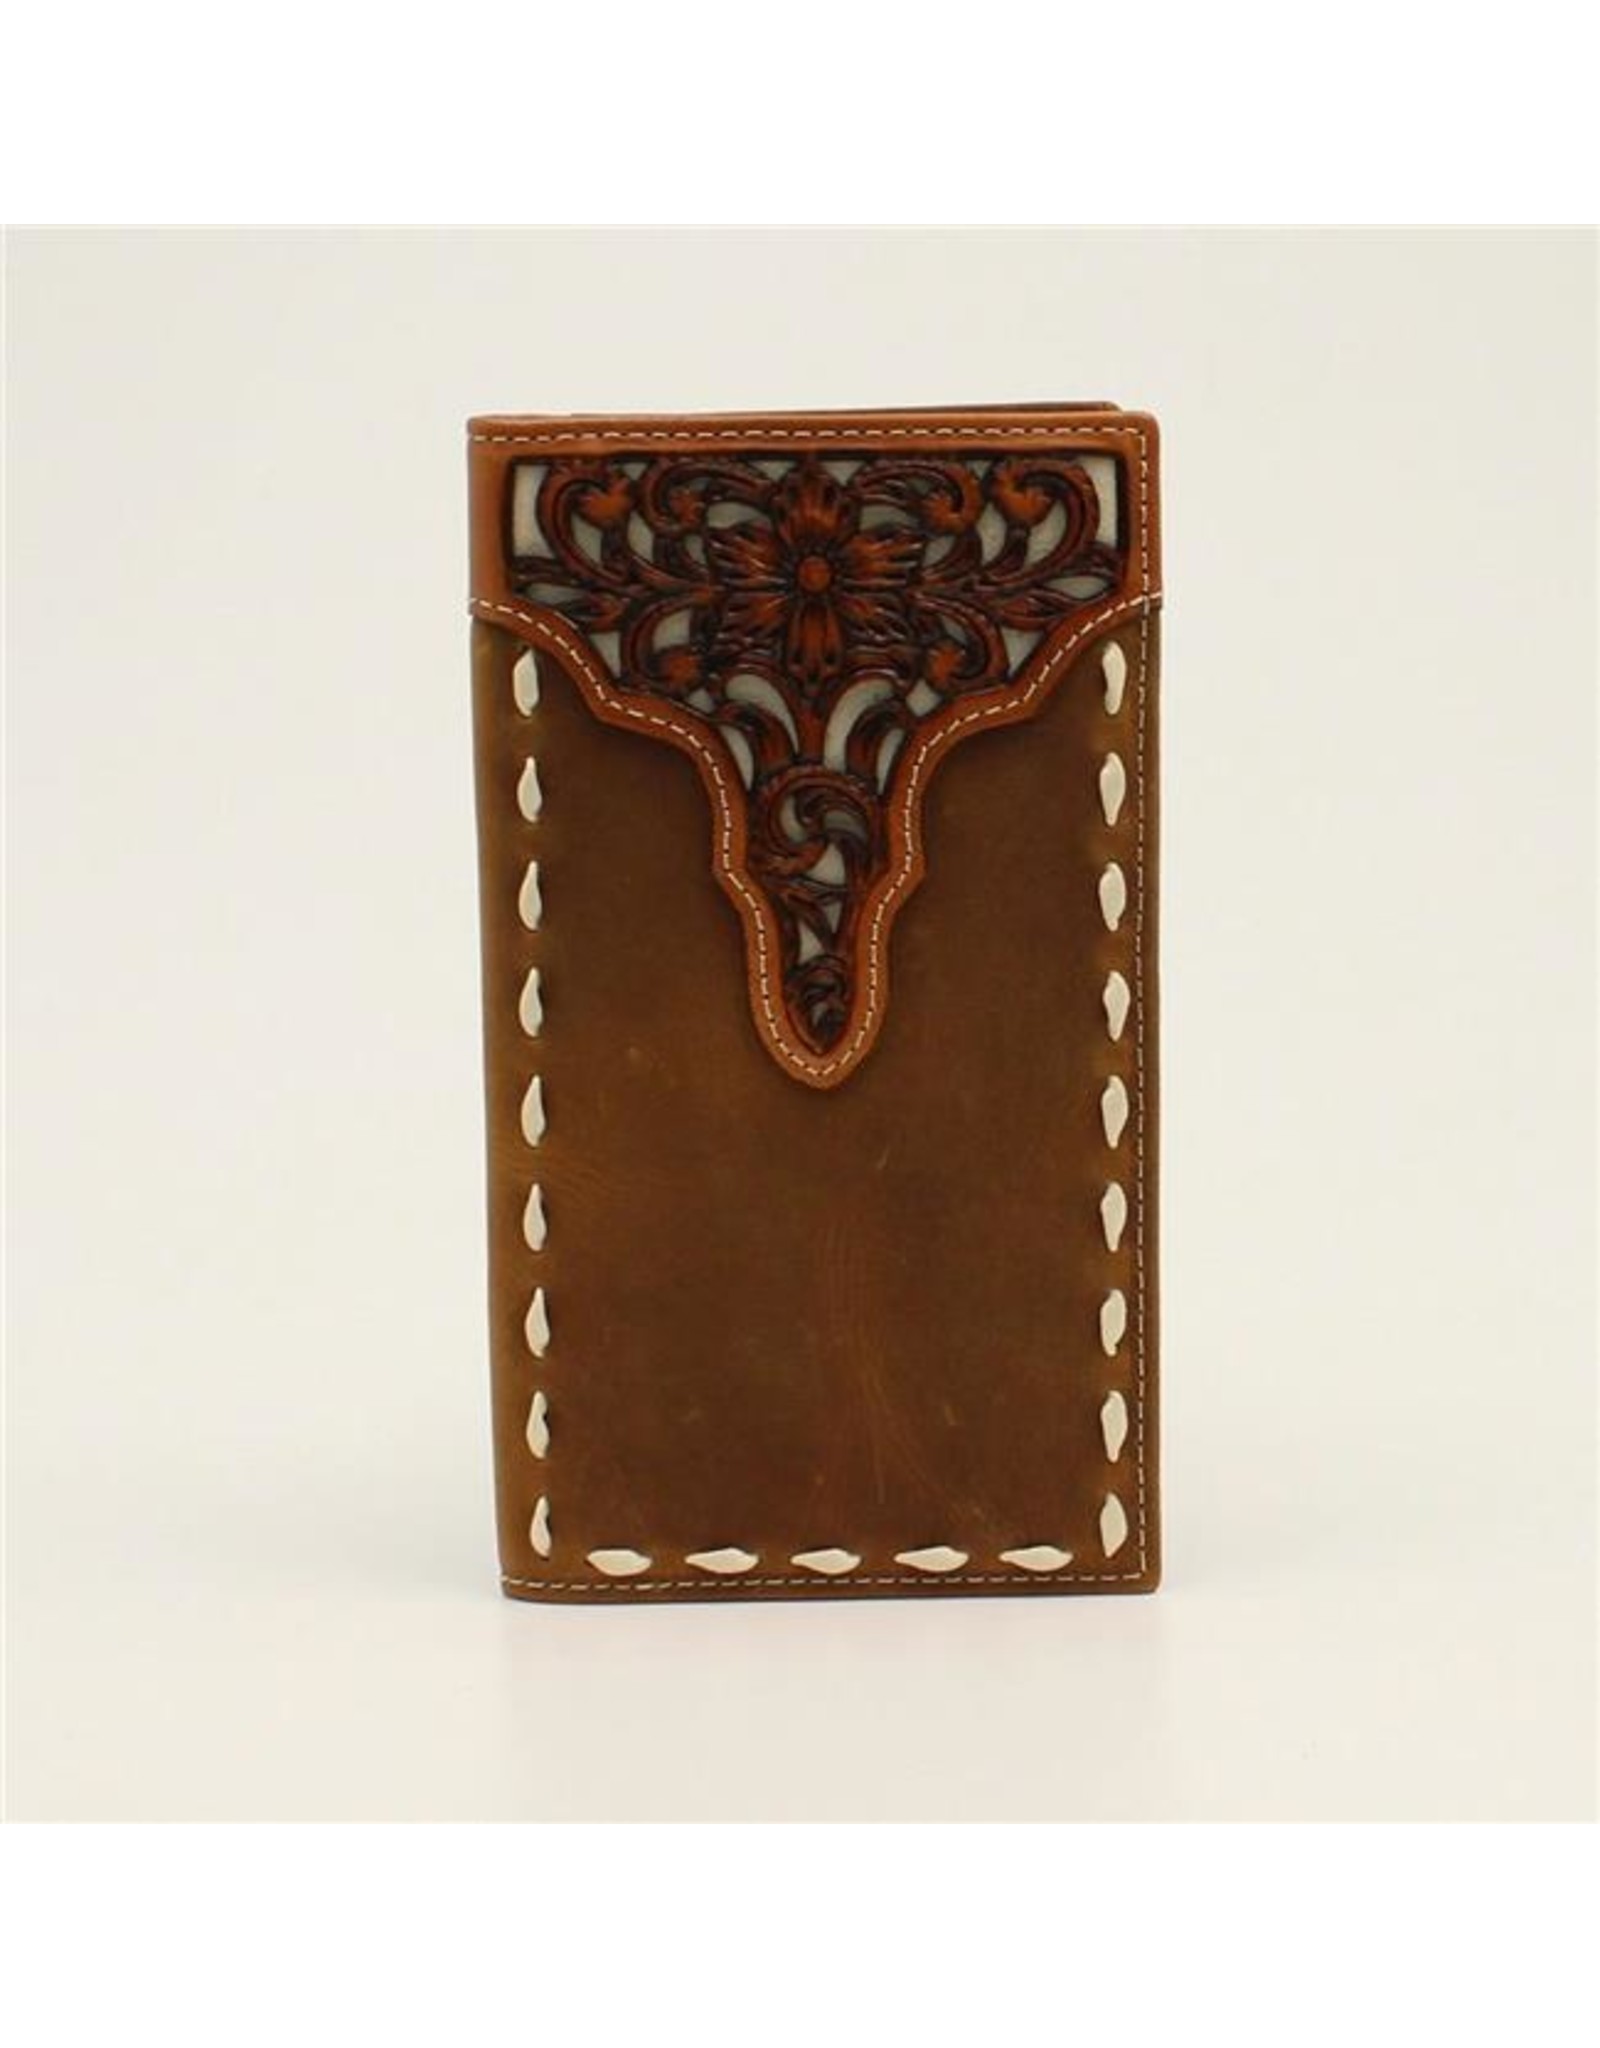 Ariat Floral Overlay Buckstitched Rodeo Wallet A3547144